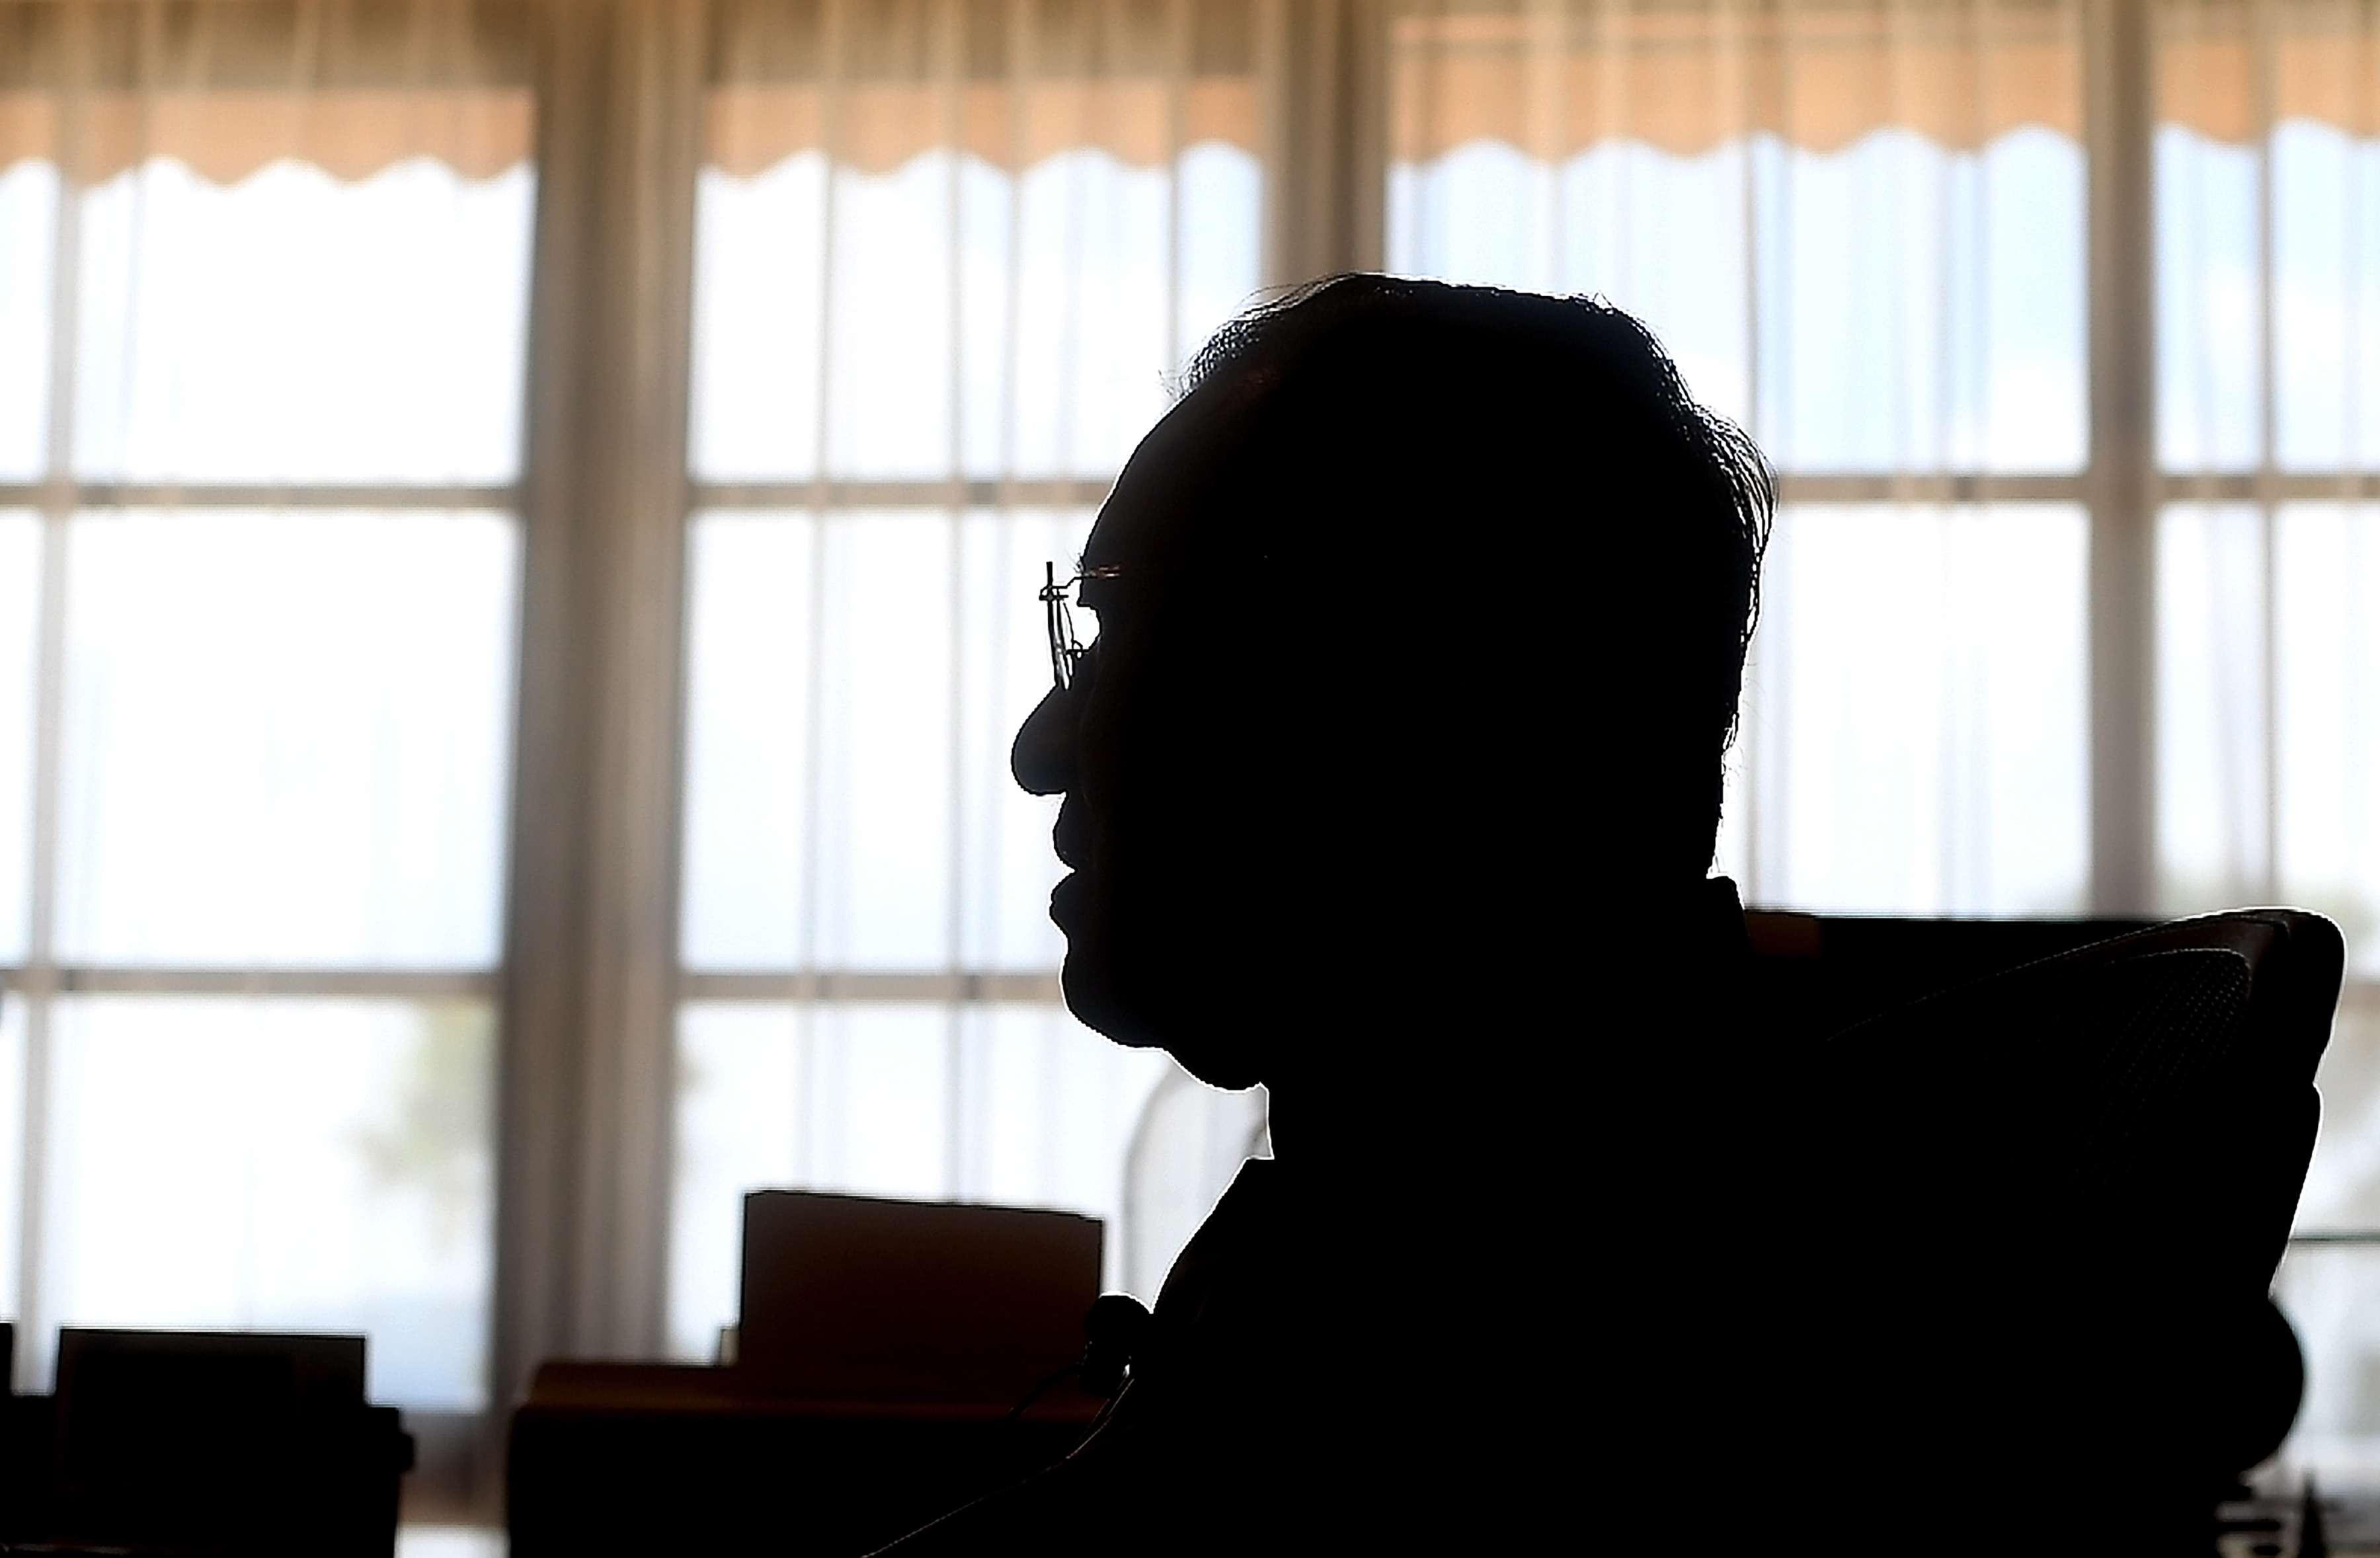 A silhouette of Malaysia’s former prime minister, Mahathir Mohamad. Photo: AFP